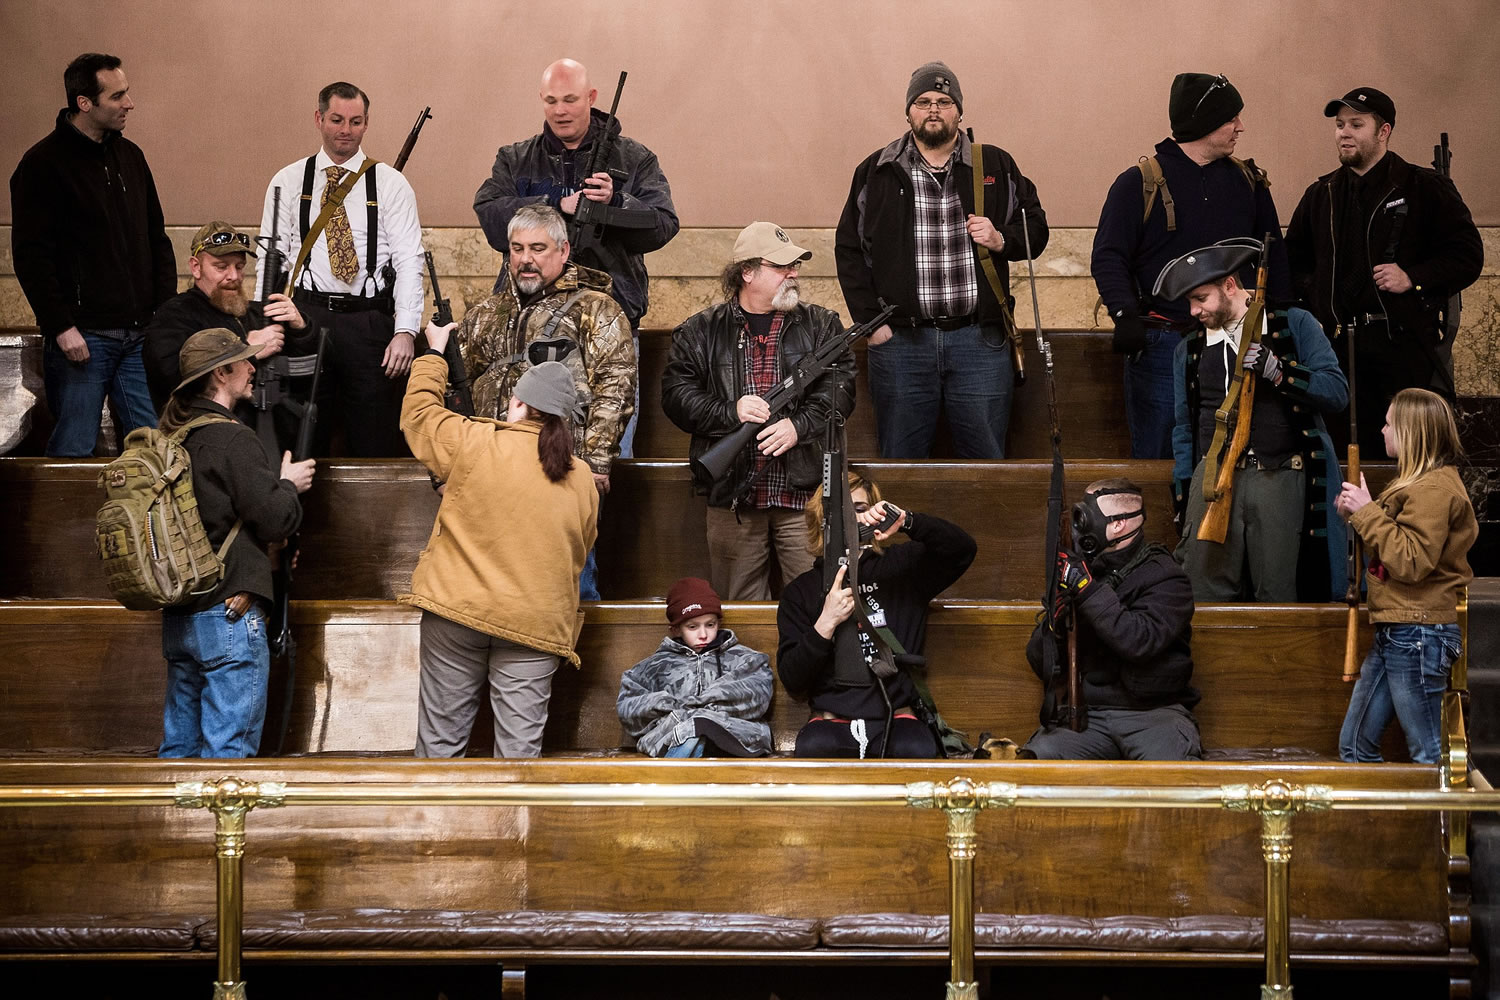 Demonstrators with weapons file into the pews of the House Gallery on Thursday to demand support to reverse Initiative 594 during a rally in the Capitol building in Olympia. The lieutenant governor announced Friday that open carry of guns has been banned in the Senate's public viewing area. No decision has been made on openly carrying guns in the House's public gallery.